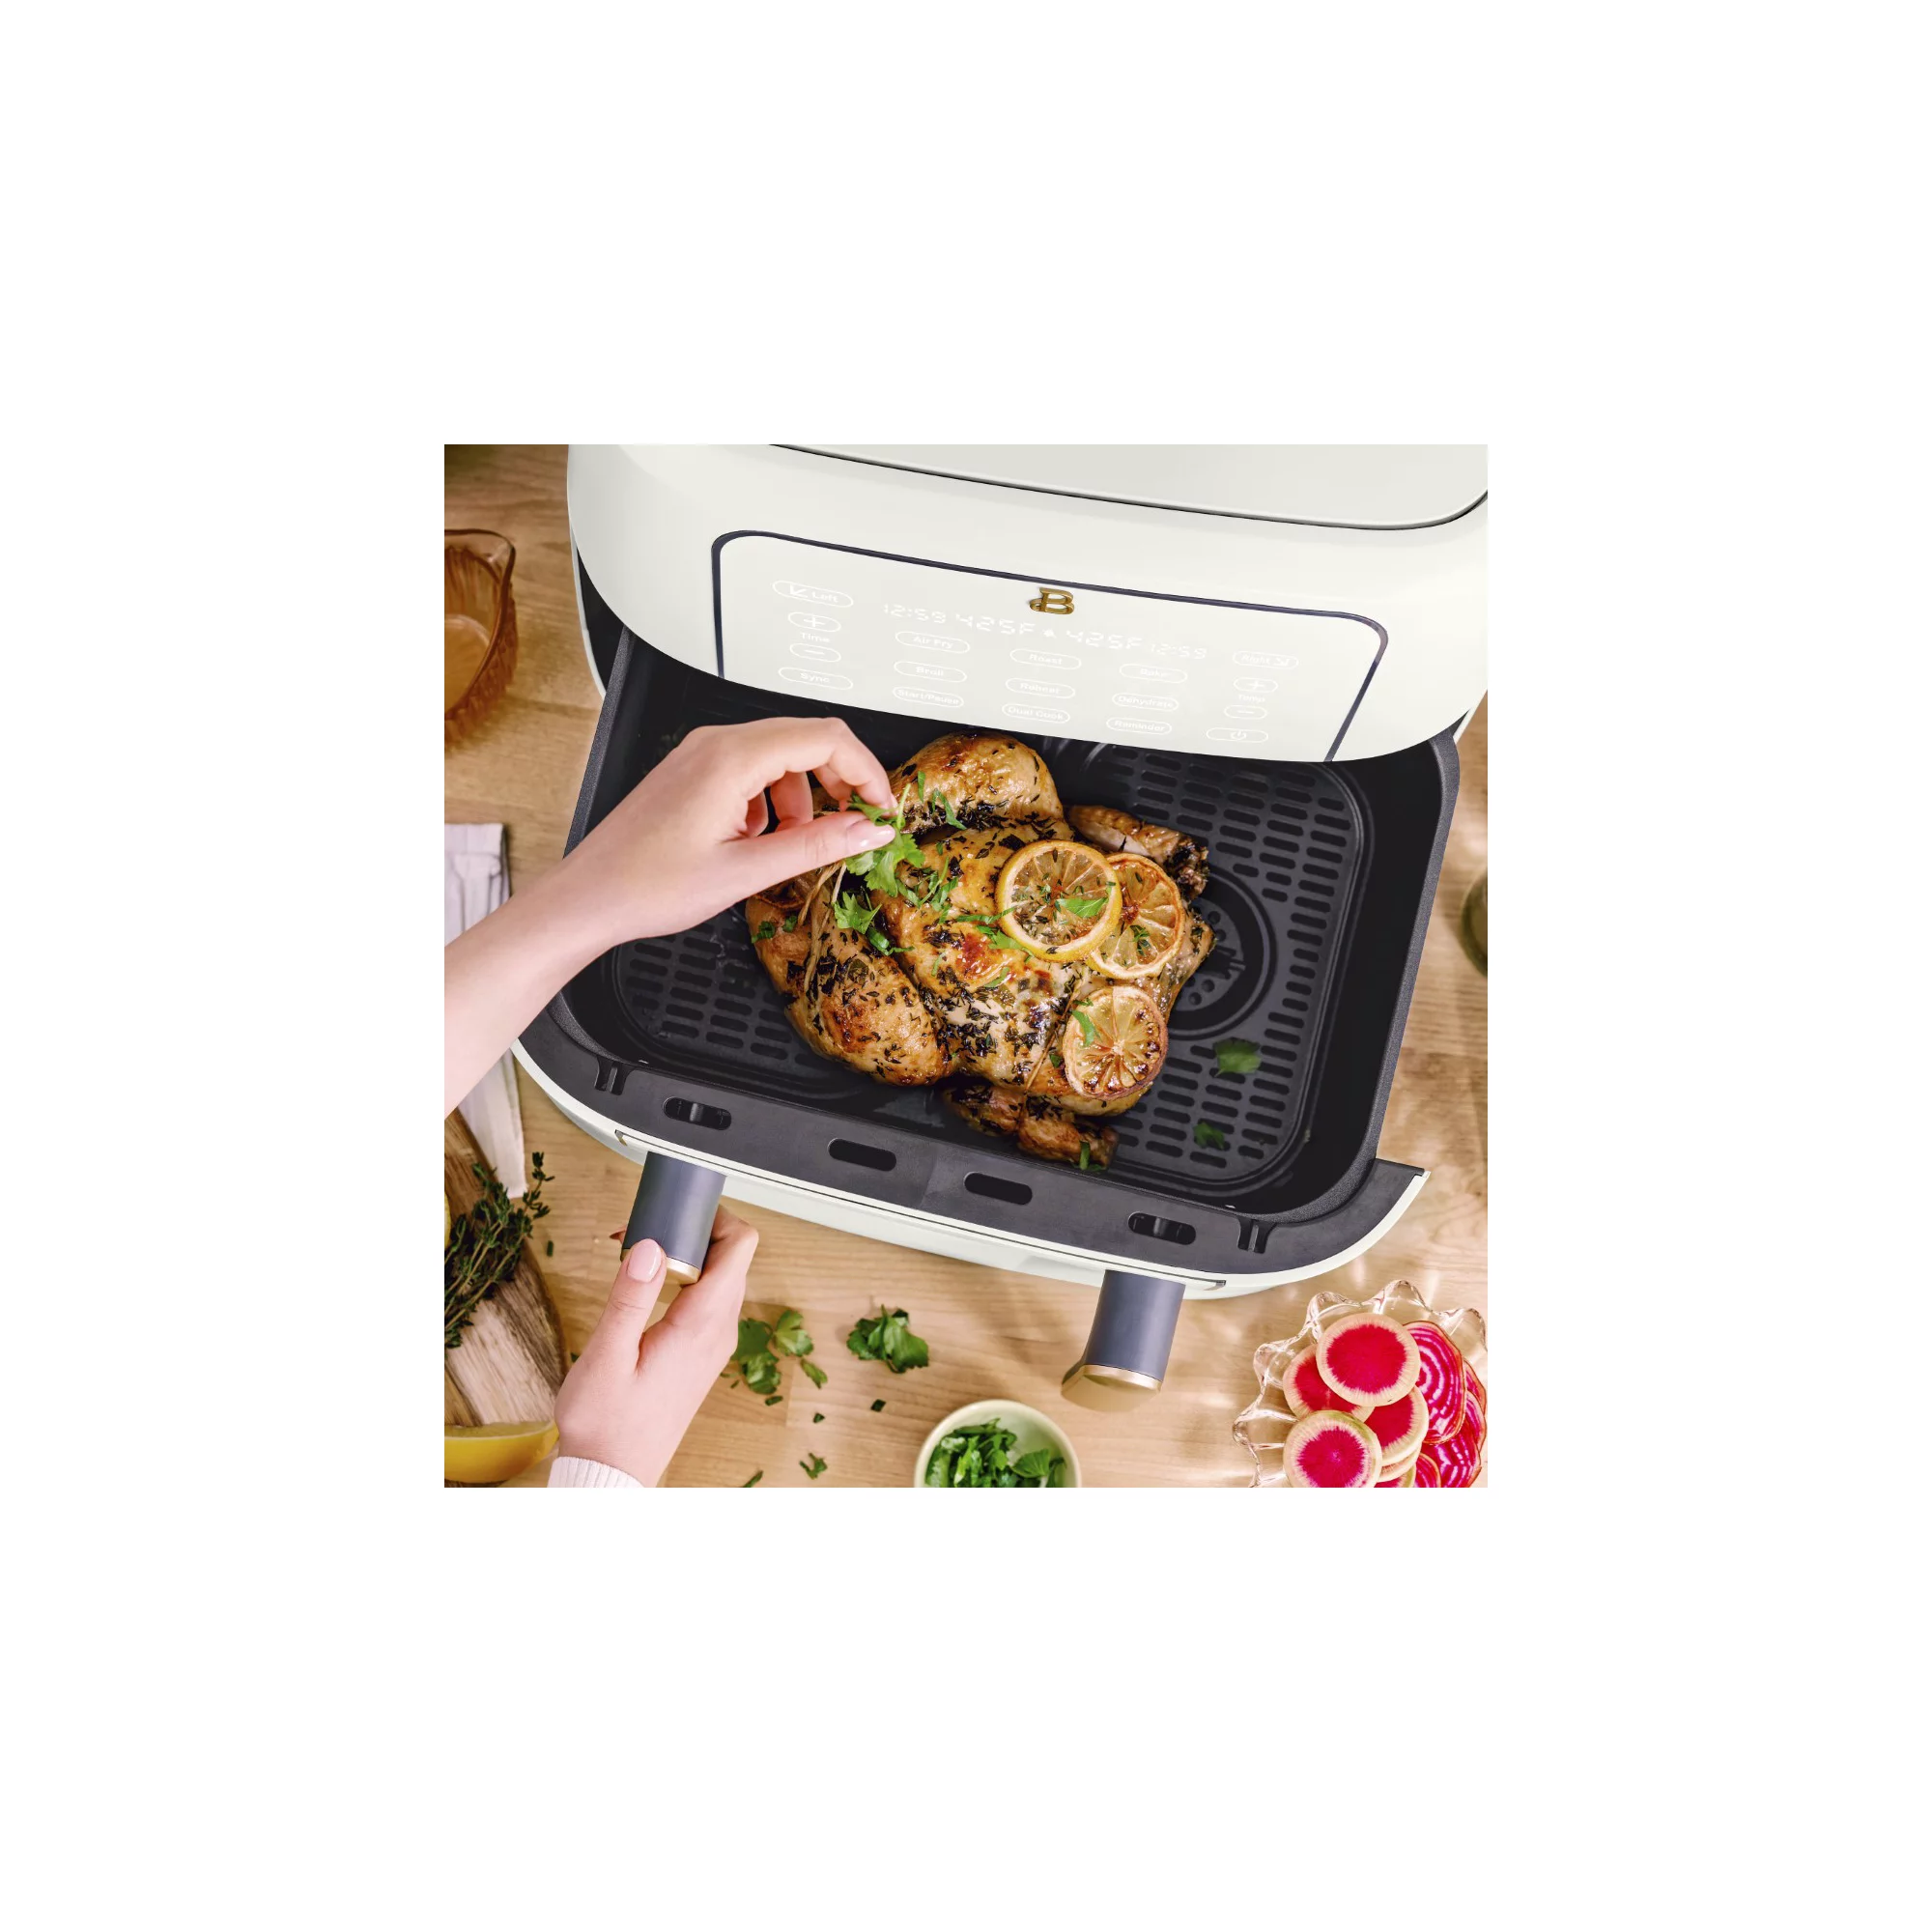  Quart Touchscreen Air Fryer, White Icing by Drew